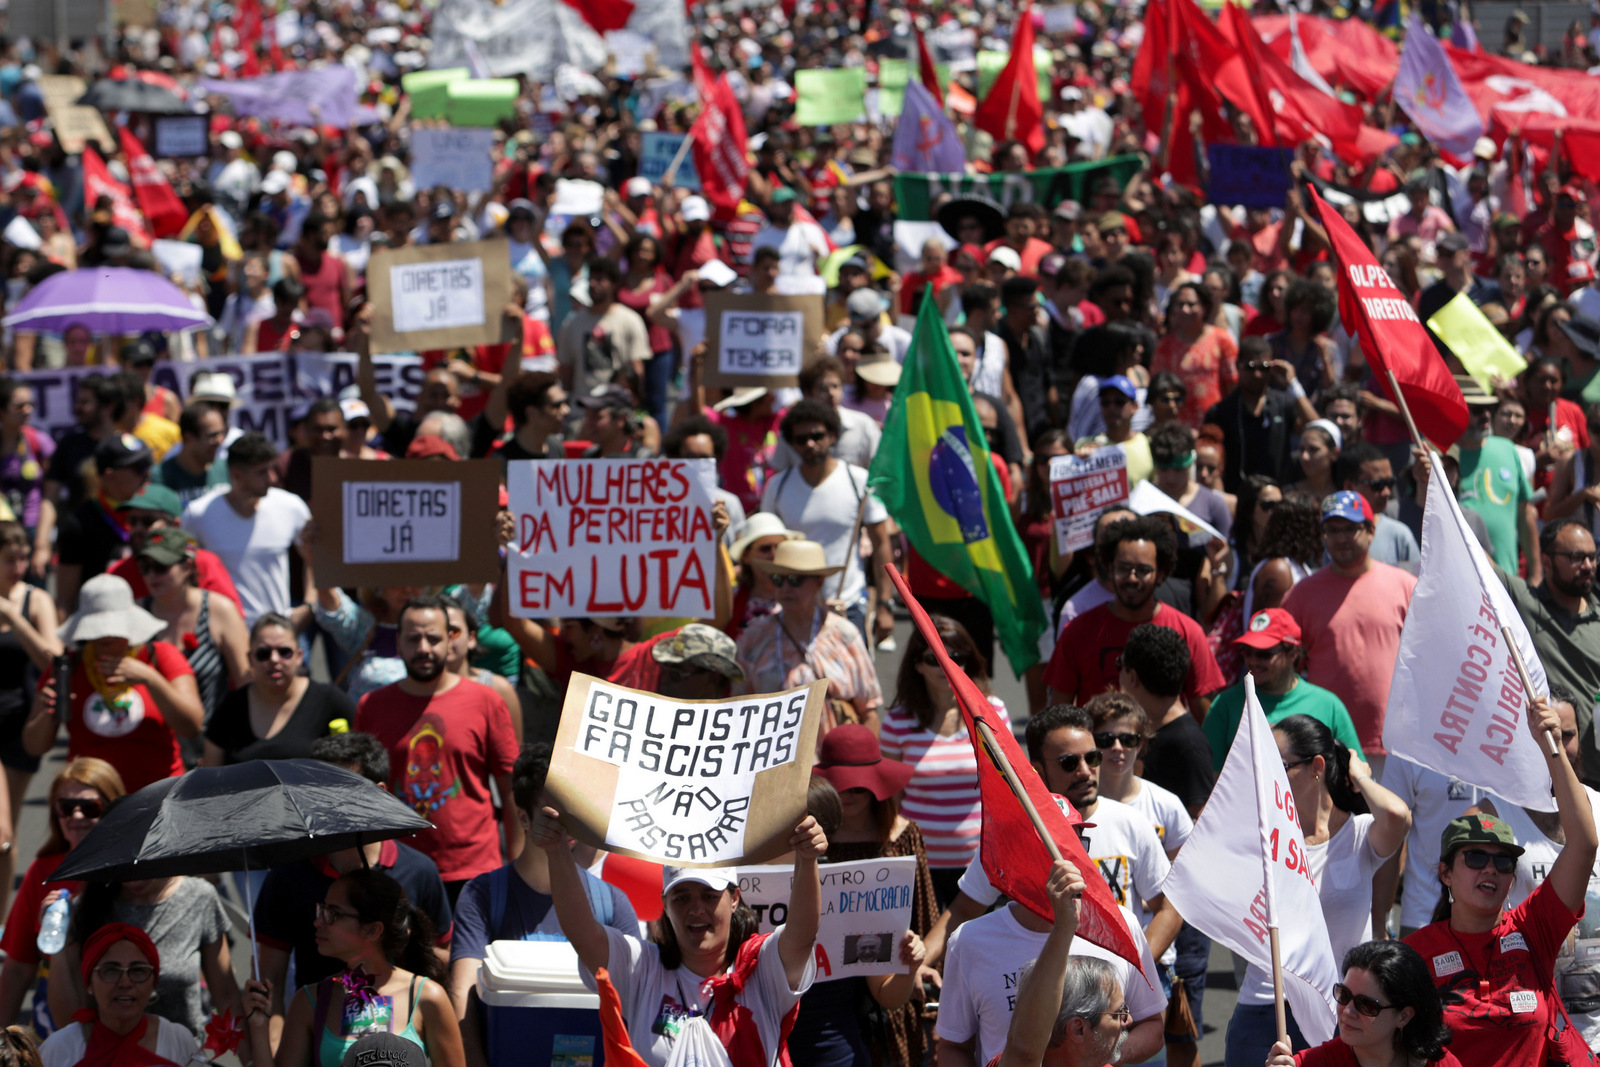 Demonstrators protest Brazil's President Michel Temer after a military Independence Day parade in Brasilia, Brazil, Wednesday, Sept. 7, 2016. (AP/Eraldo Peres)